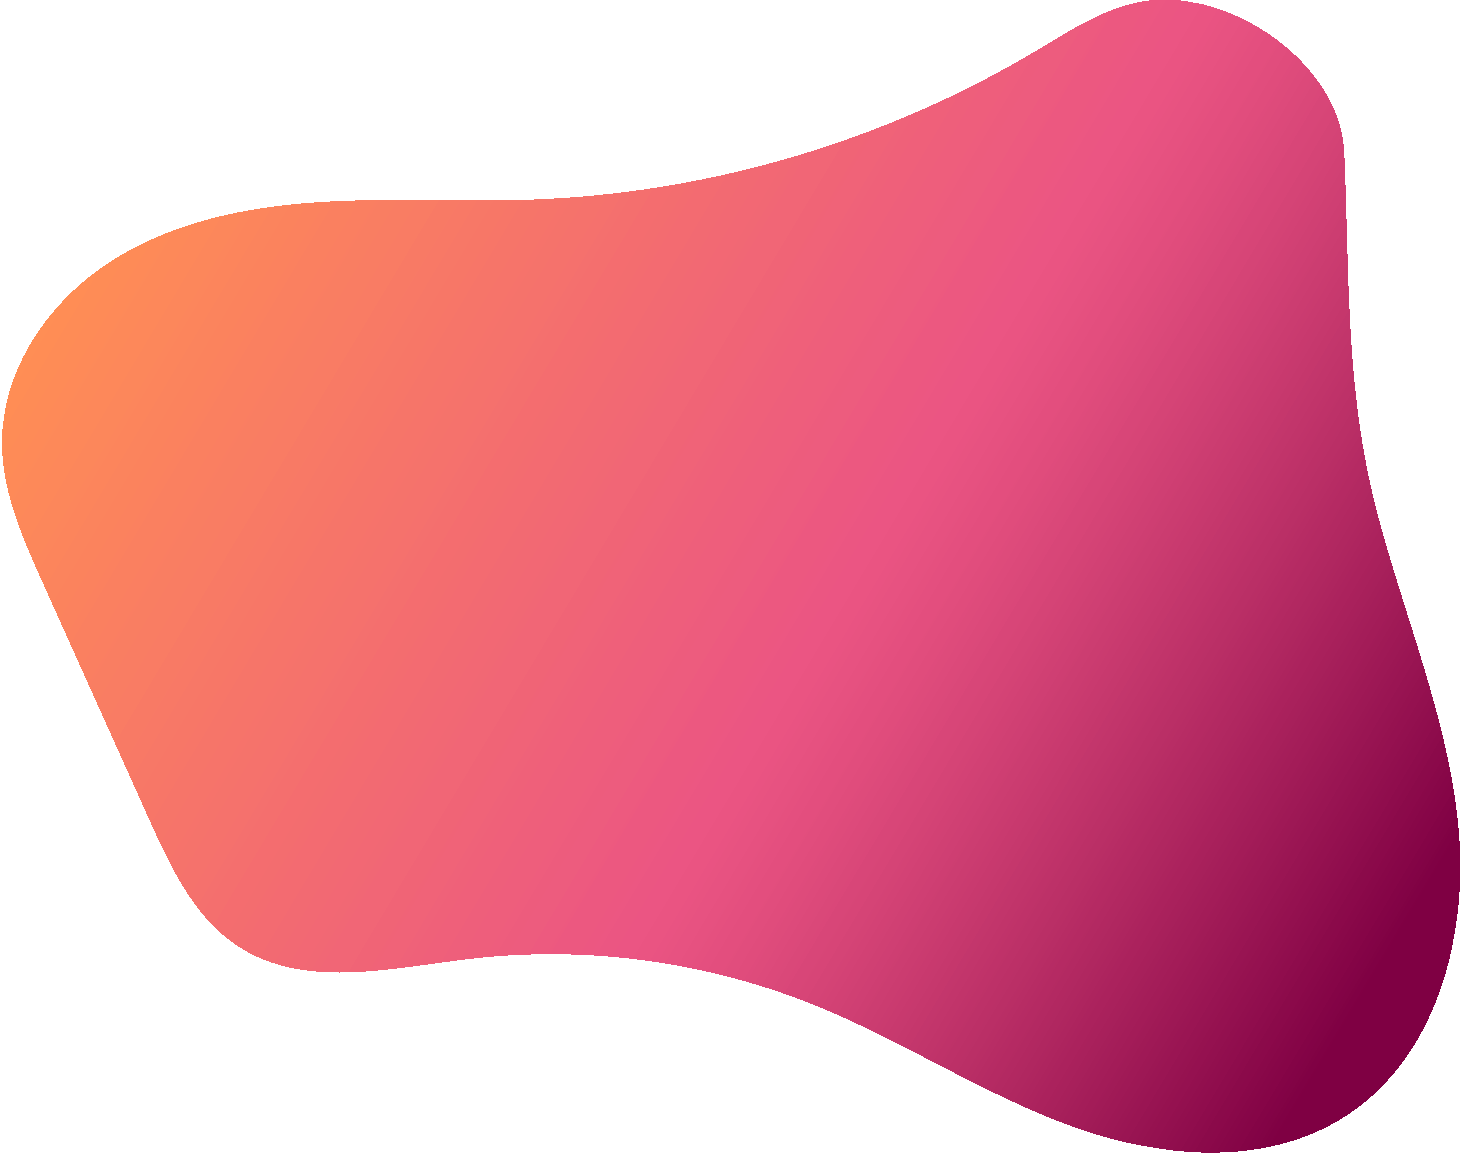 A rounded blob with a salmon to pink gradient.